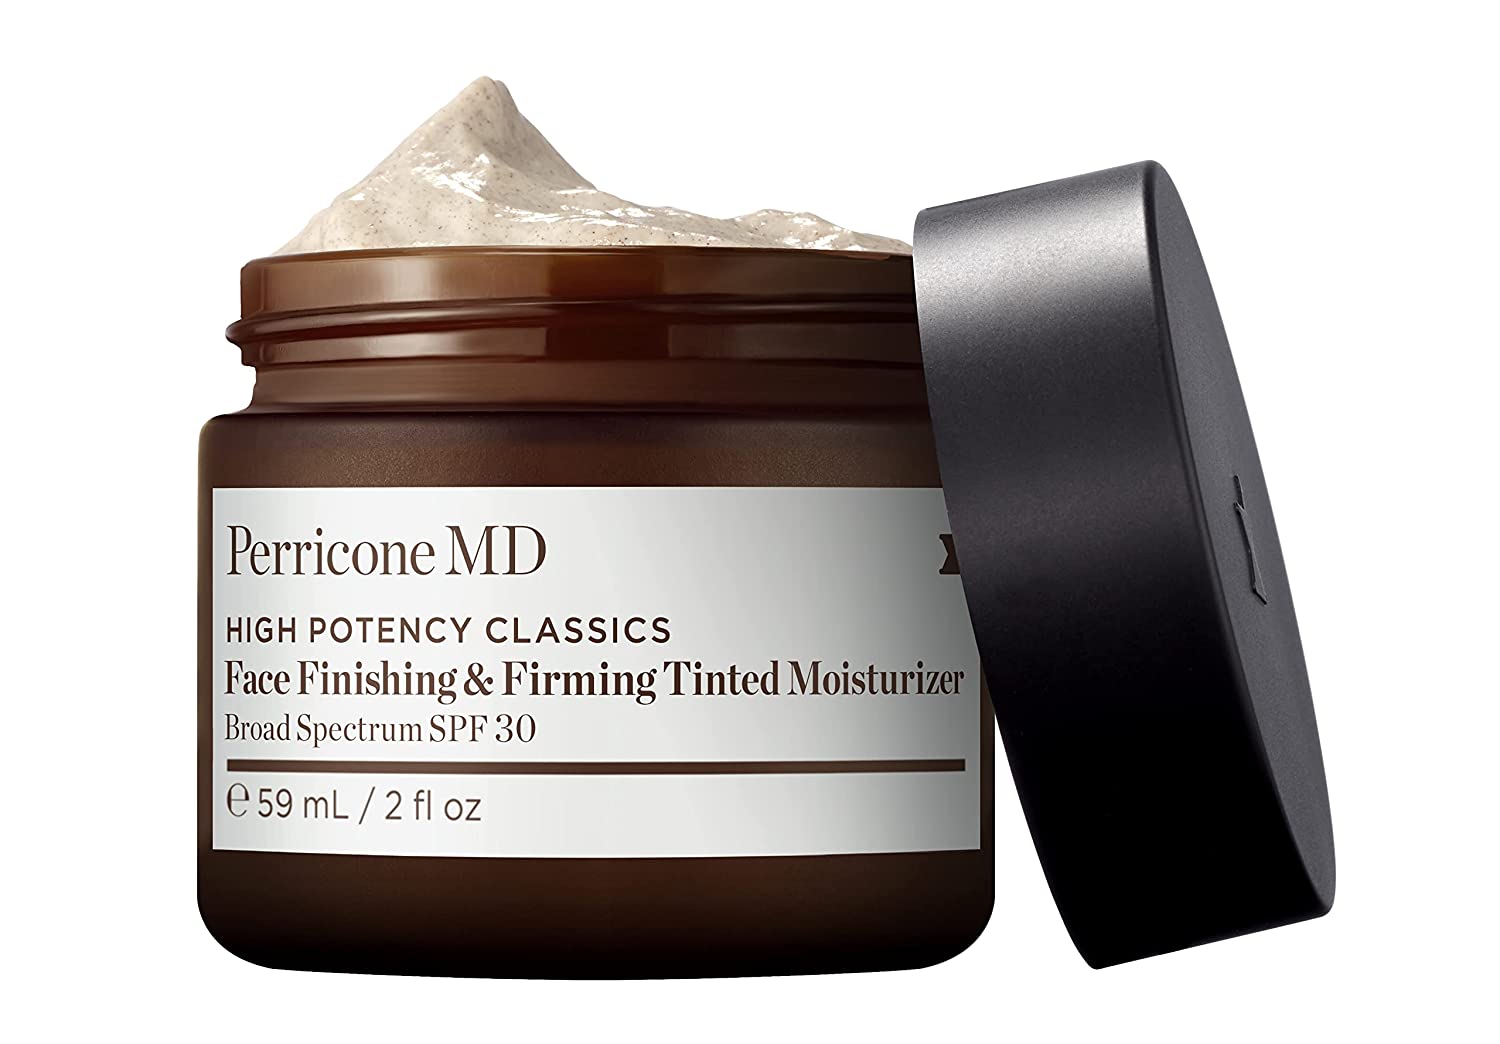 Perricone MD High Potency Classics Face Finishing & Firming Tinted Moisturizer SPF30, 59ml